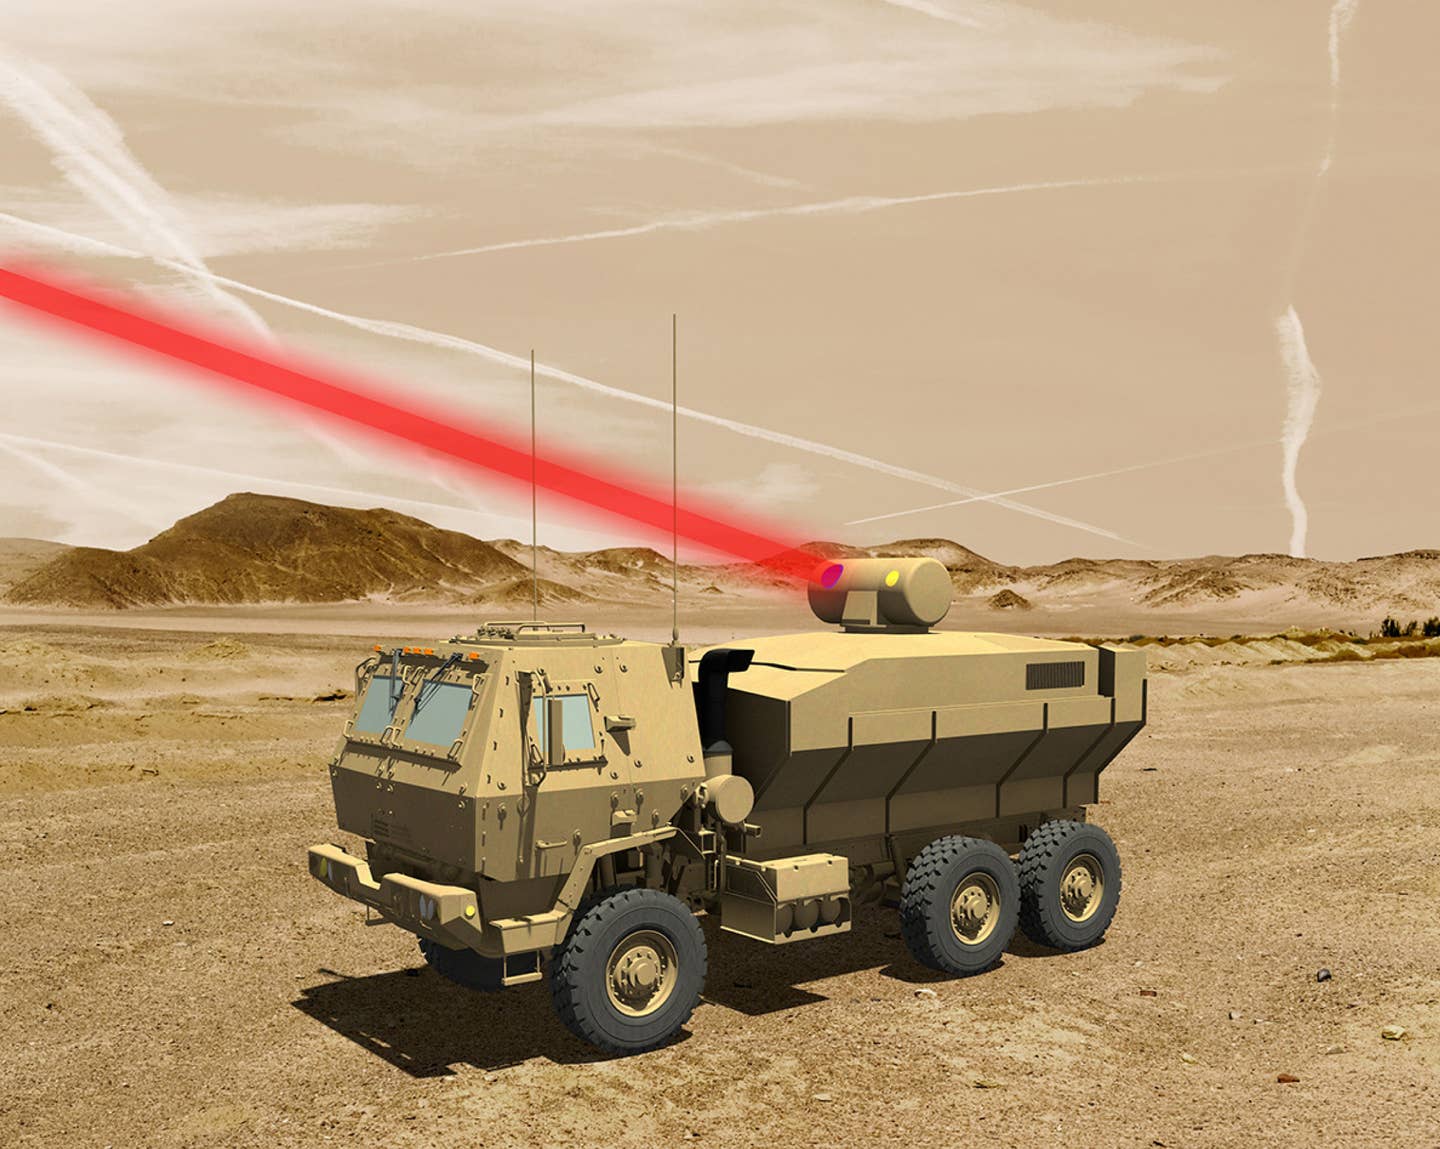 For LANCE, Lockheed has been drawing from its previous experience in ground-based lasers, like this concept for a Future Mobile Tactical Vehicle armed with a directed-energy weapon. <em>Lockheed Martin</em>